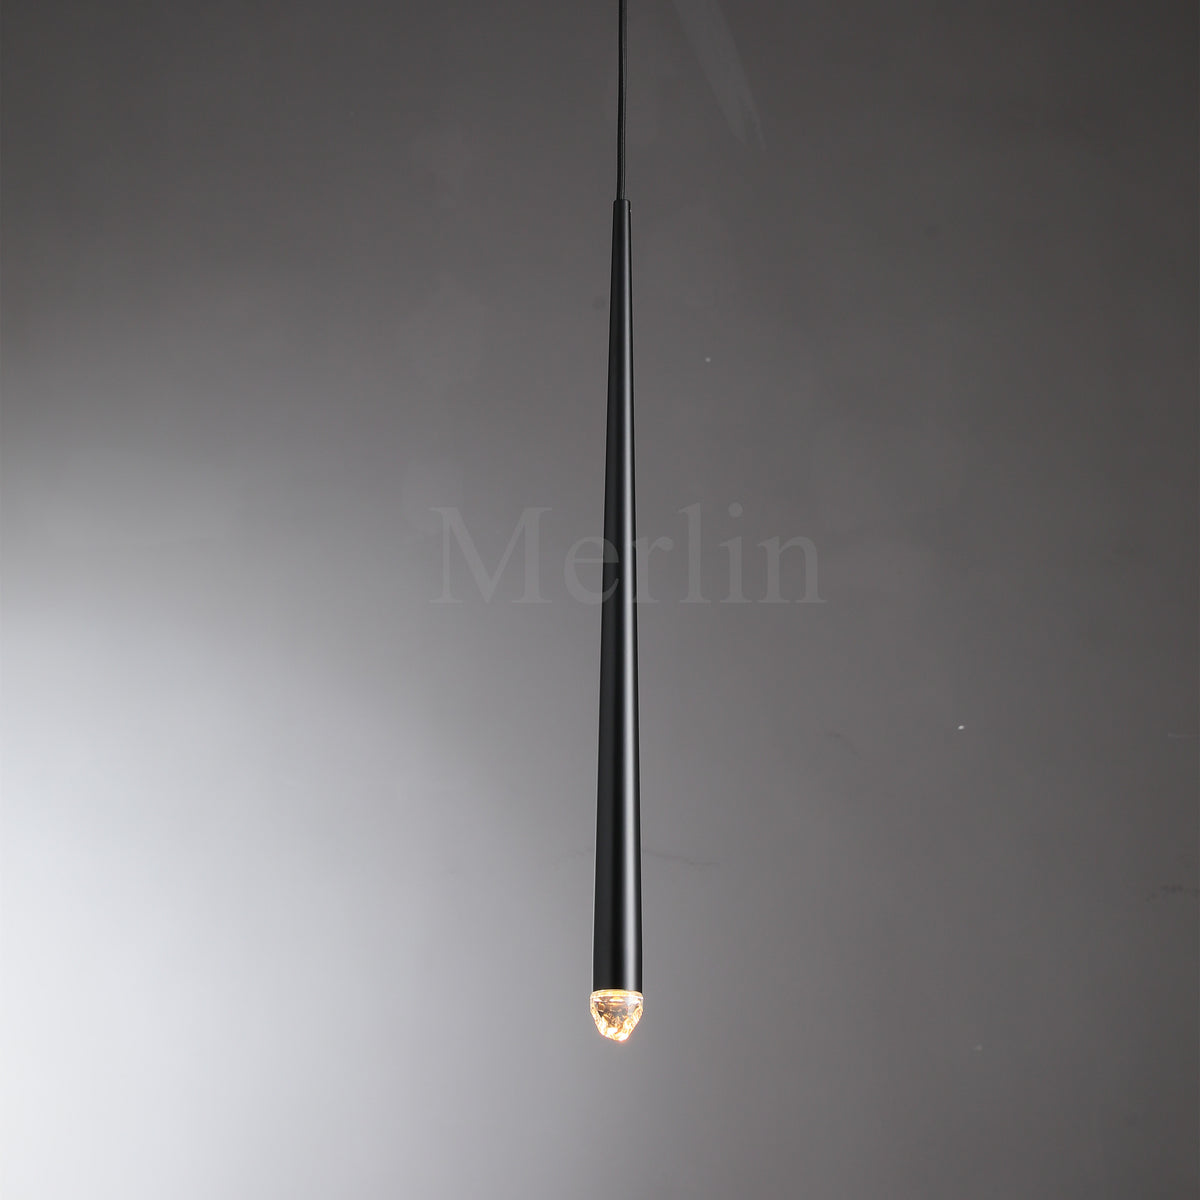 Melinda Stylish Modern Lamp Perfect for Contemporary Dining Rooms, Kitchen Islands